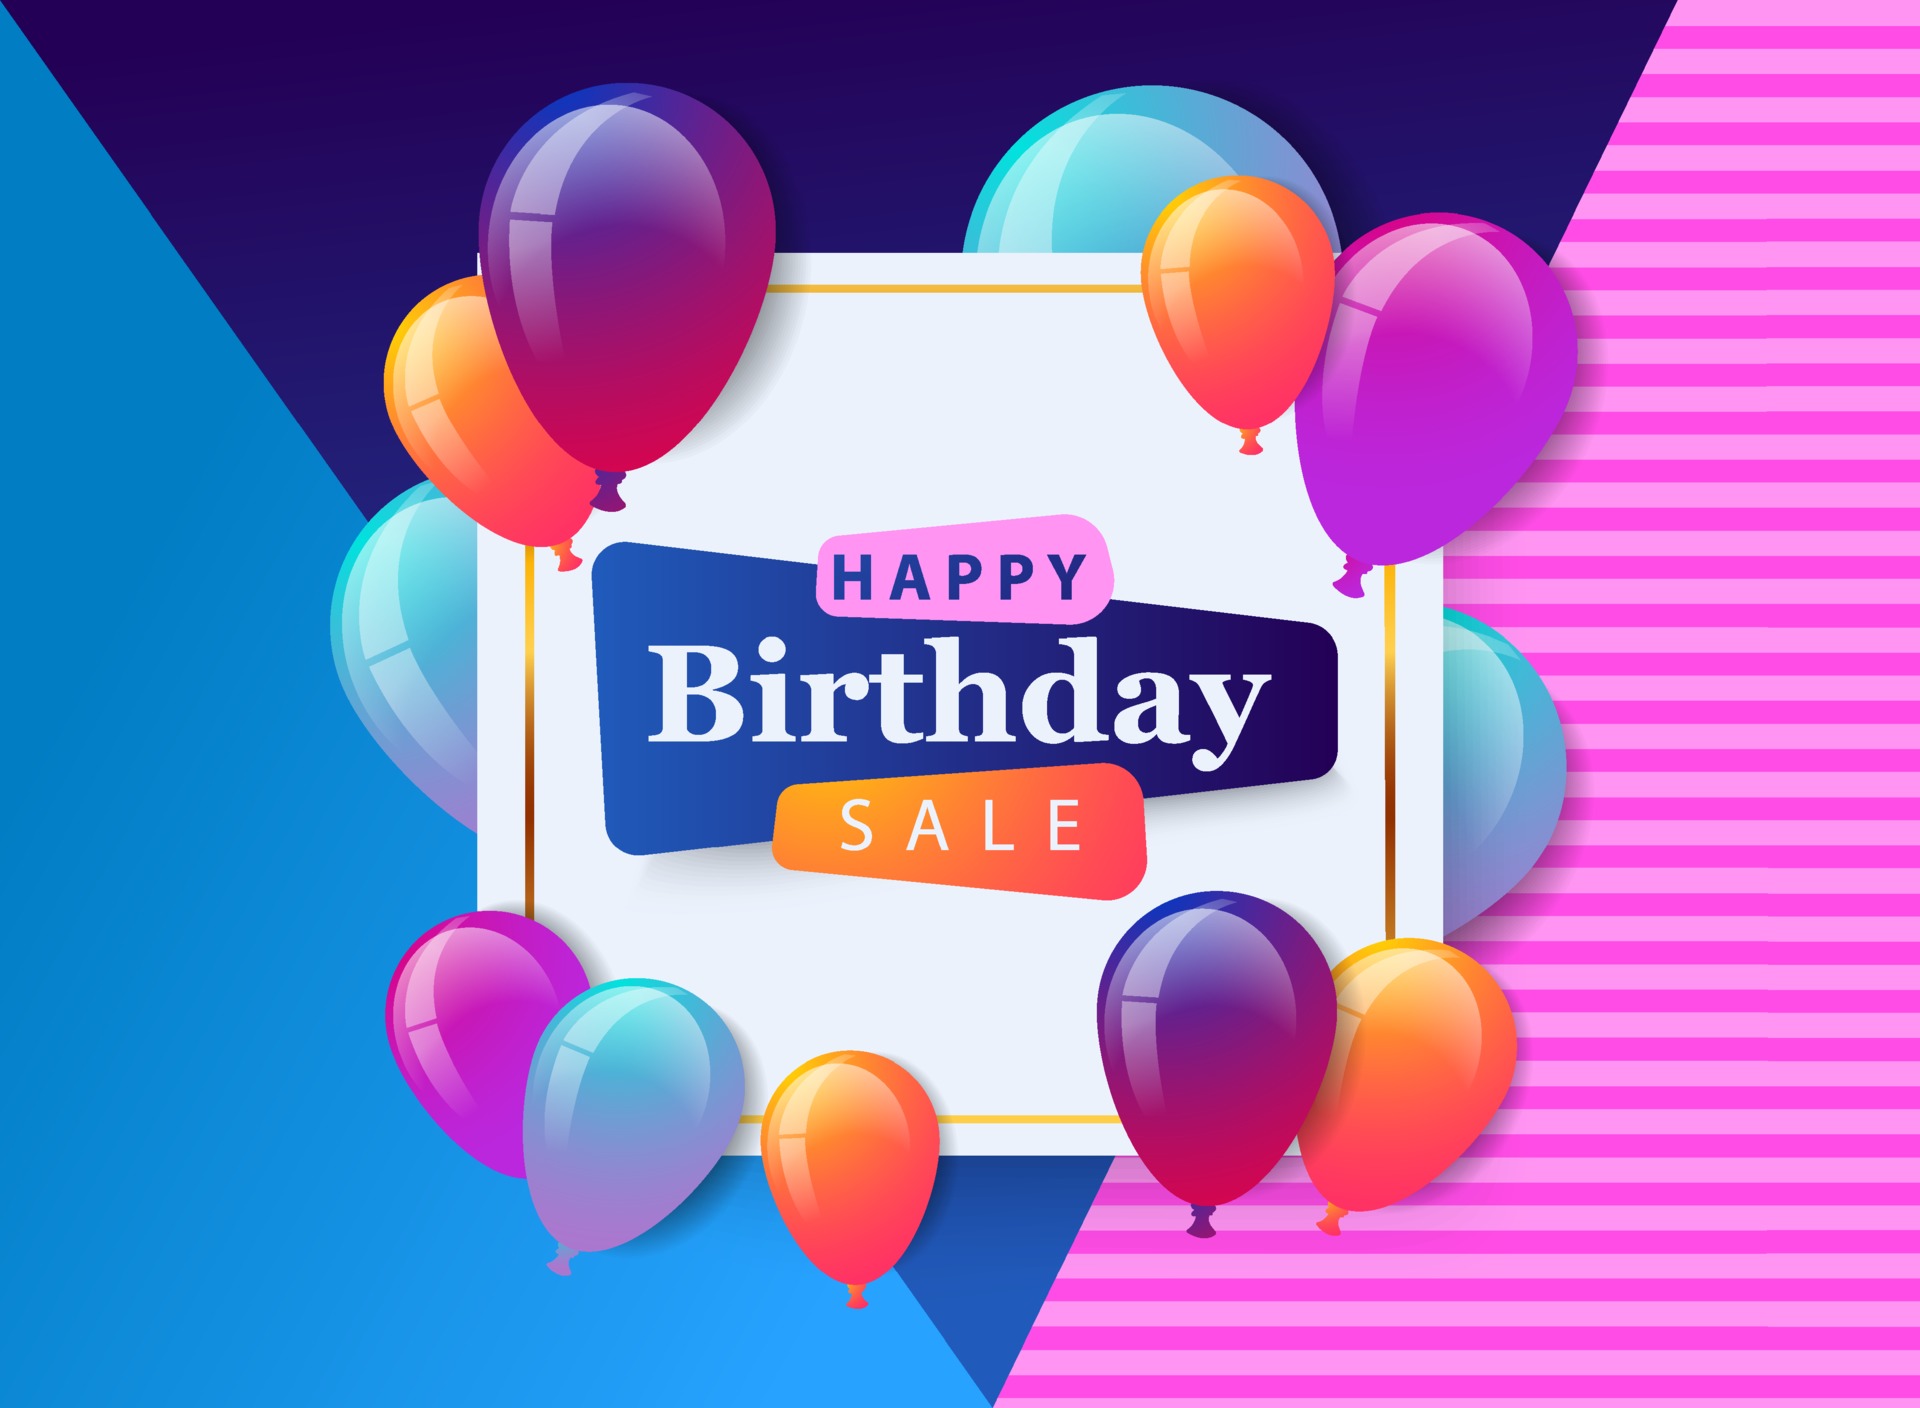 Happy Birthday Sale celebration design for greeting card, poster